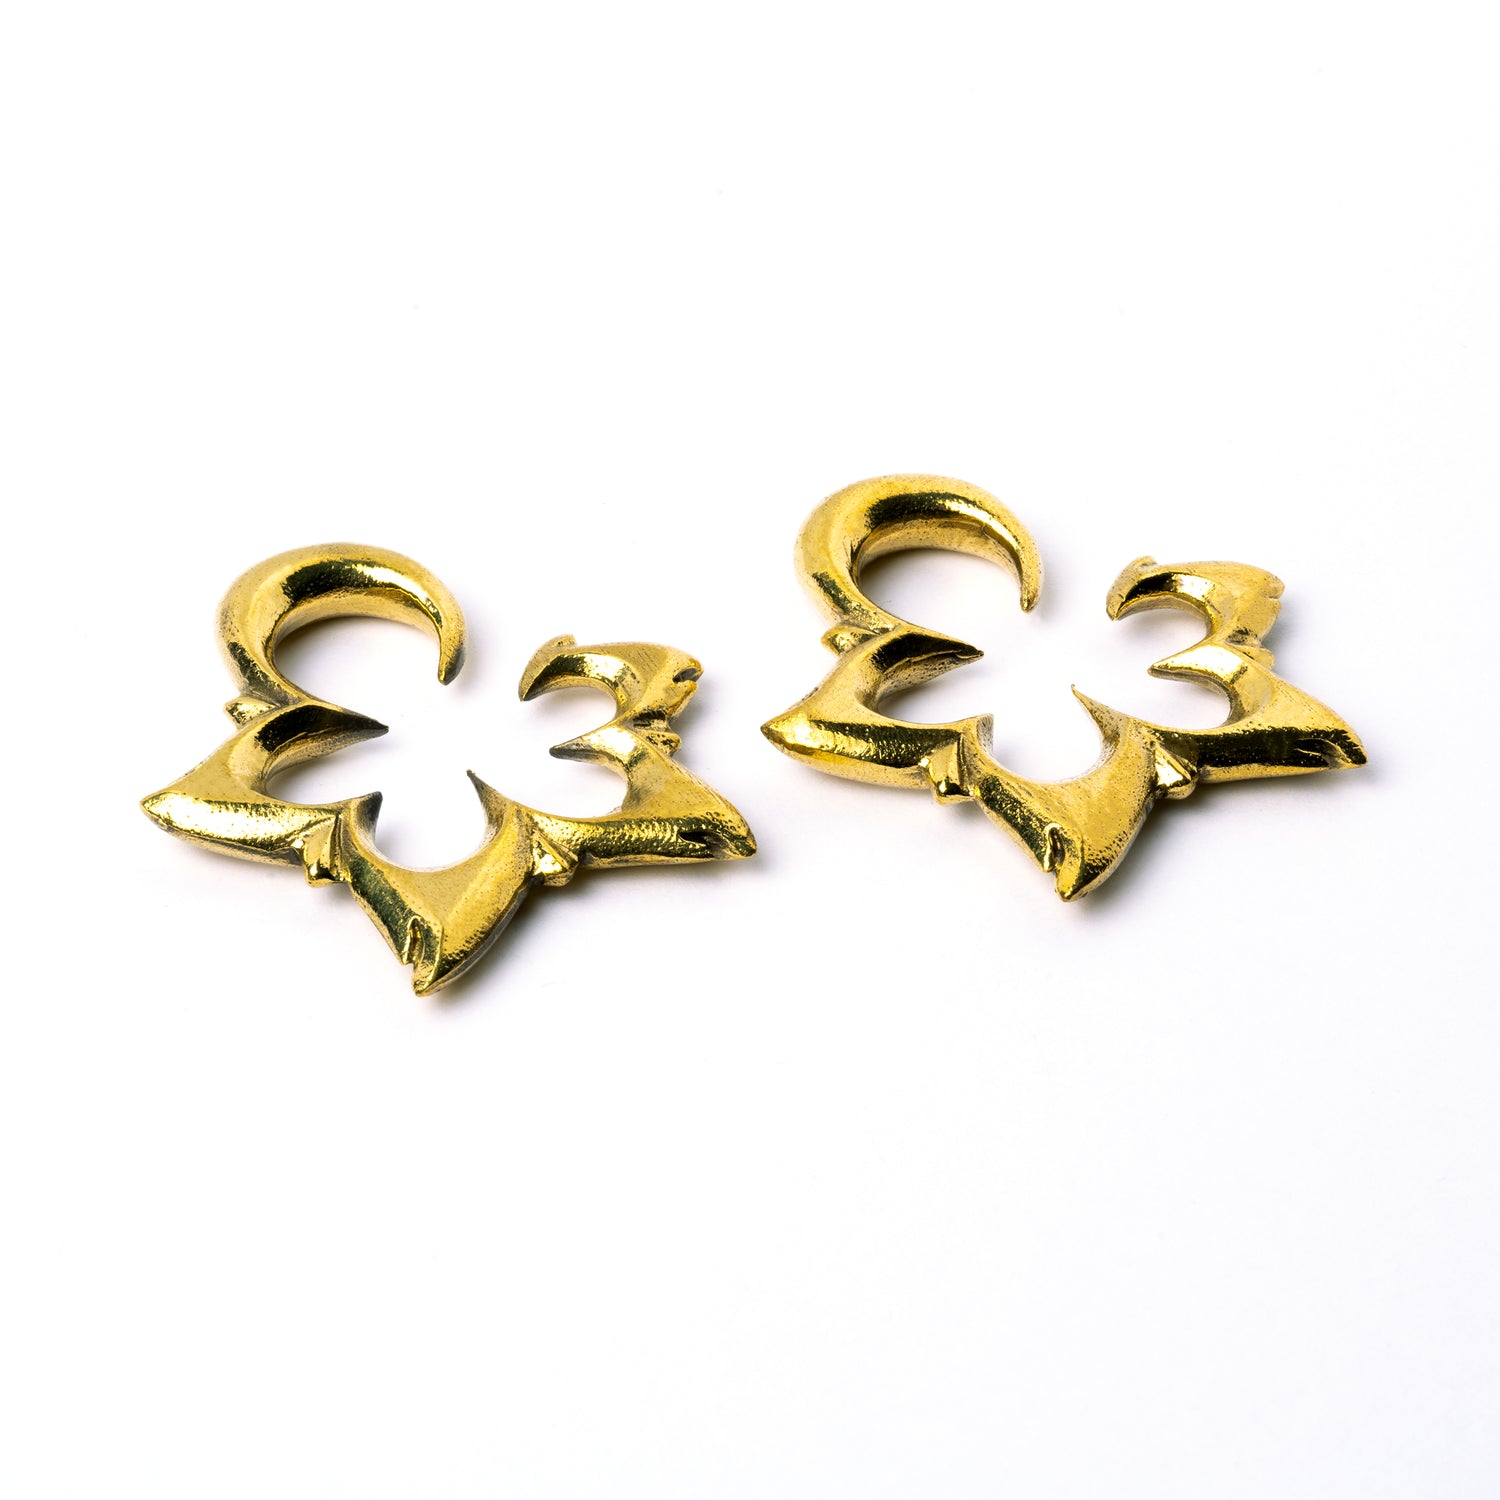 pair of gold brass flower open shape ear weights hangers right side view